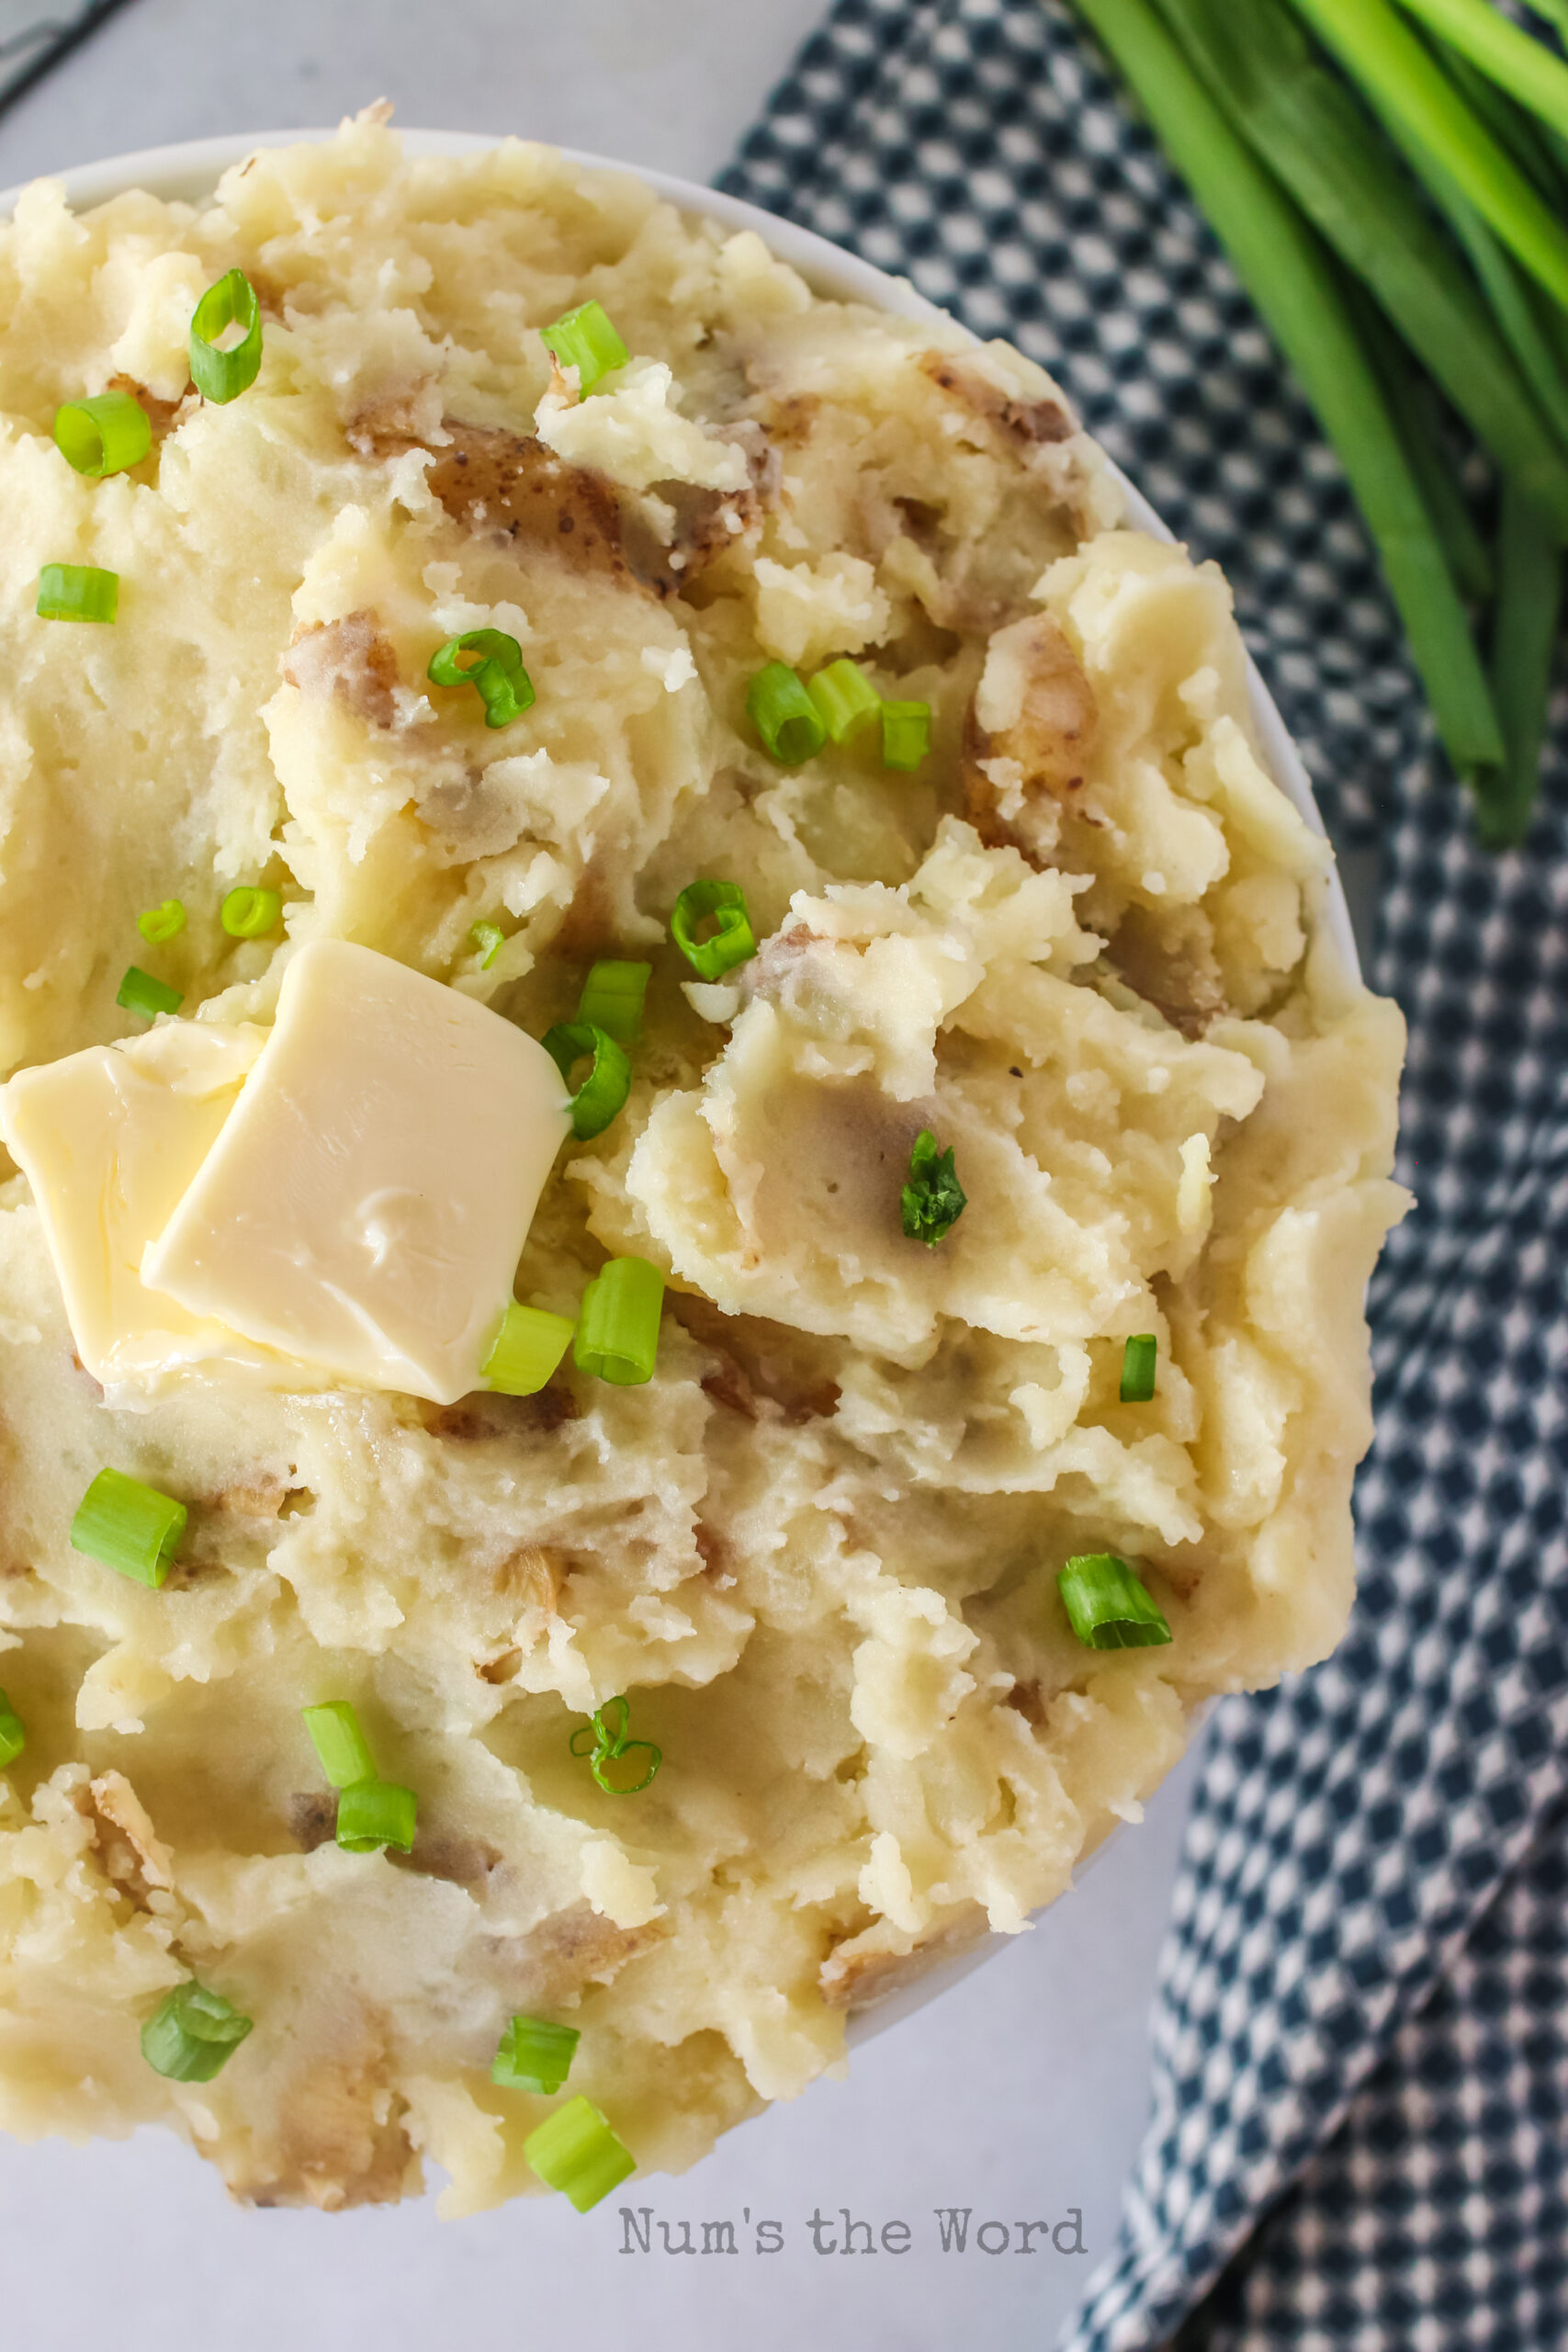 Image of Instant Pot Mashed Potatoes from the top looking down.